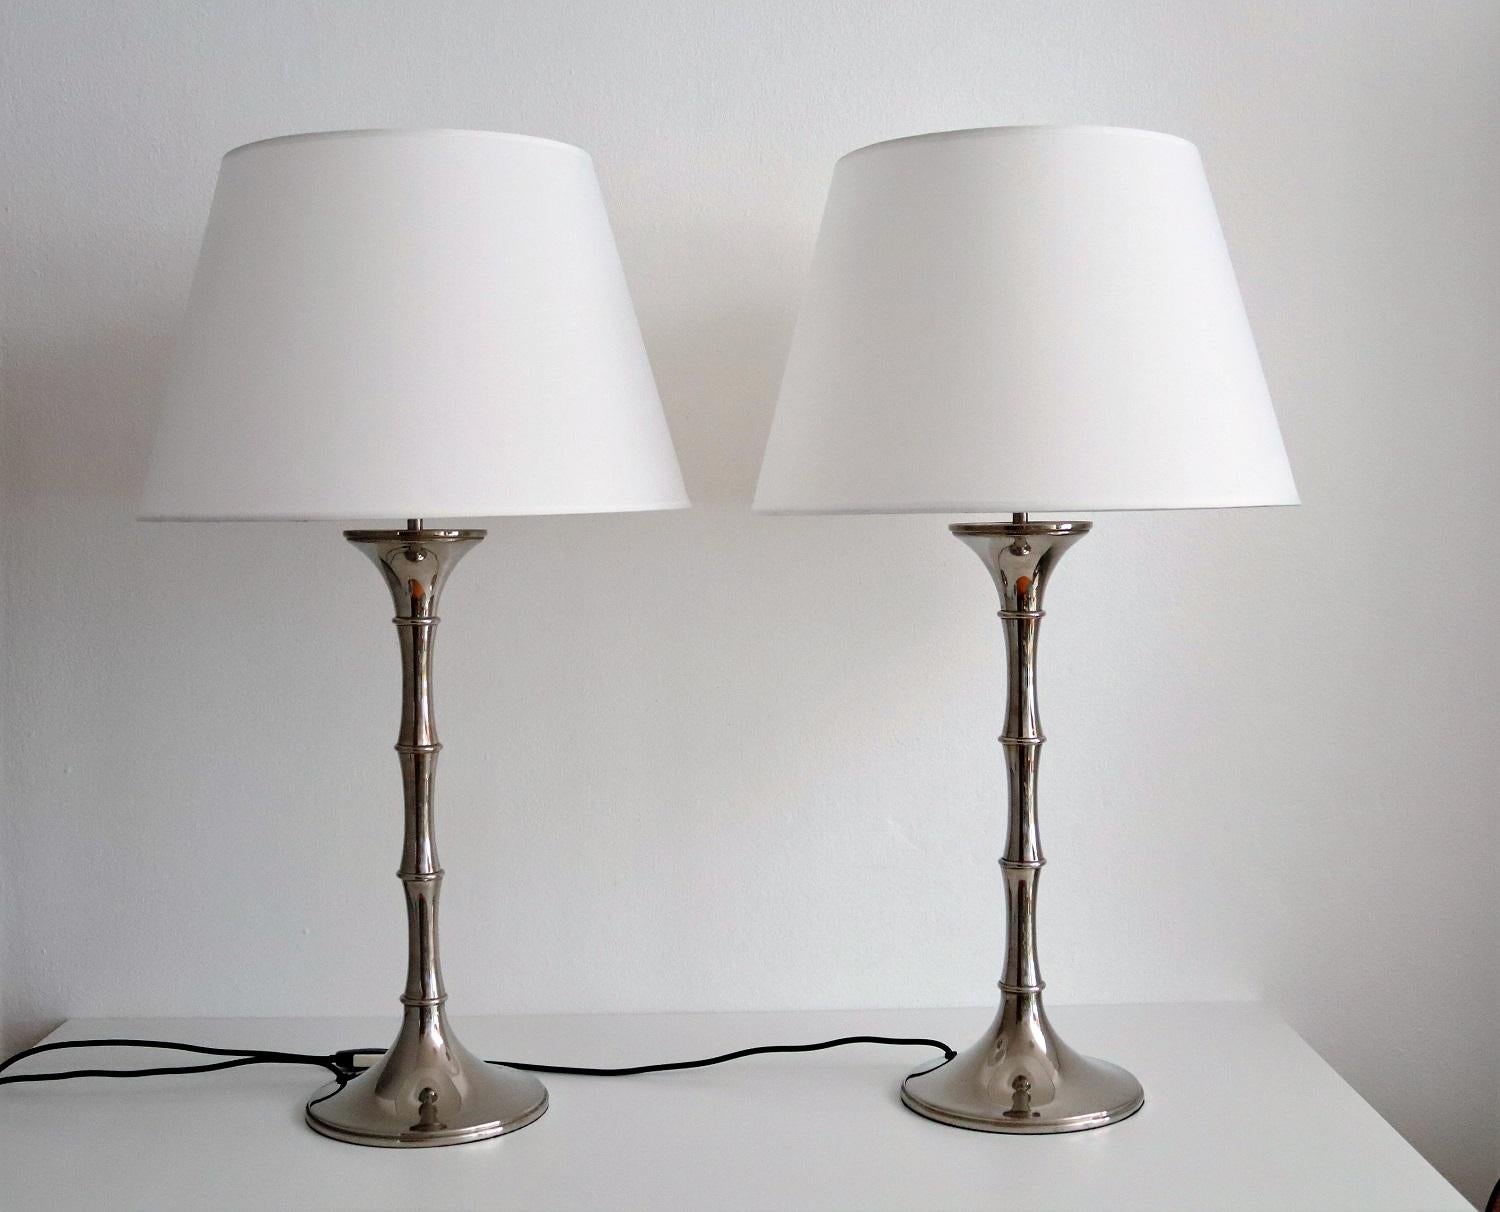 Gorgeous pair of table lamps with very nice patina made of nickel with new white lampshades.
The lamp's shape reminds to a thick bamboo branch.
The lamps have been designed by Ingo Maurer, Germany, in the 1970s.
They have been checked and cleaned